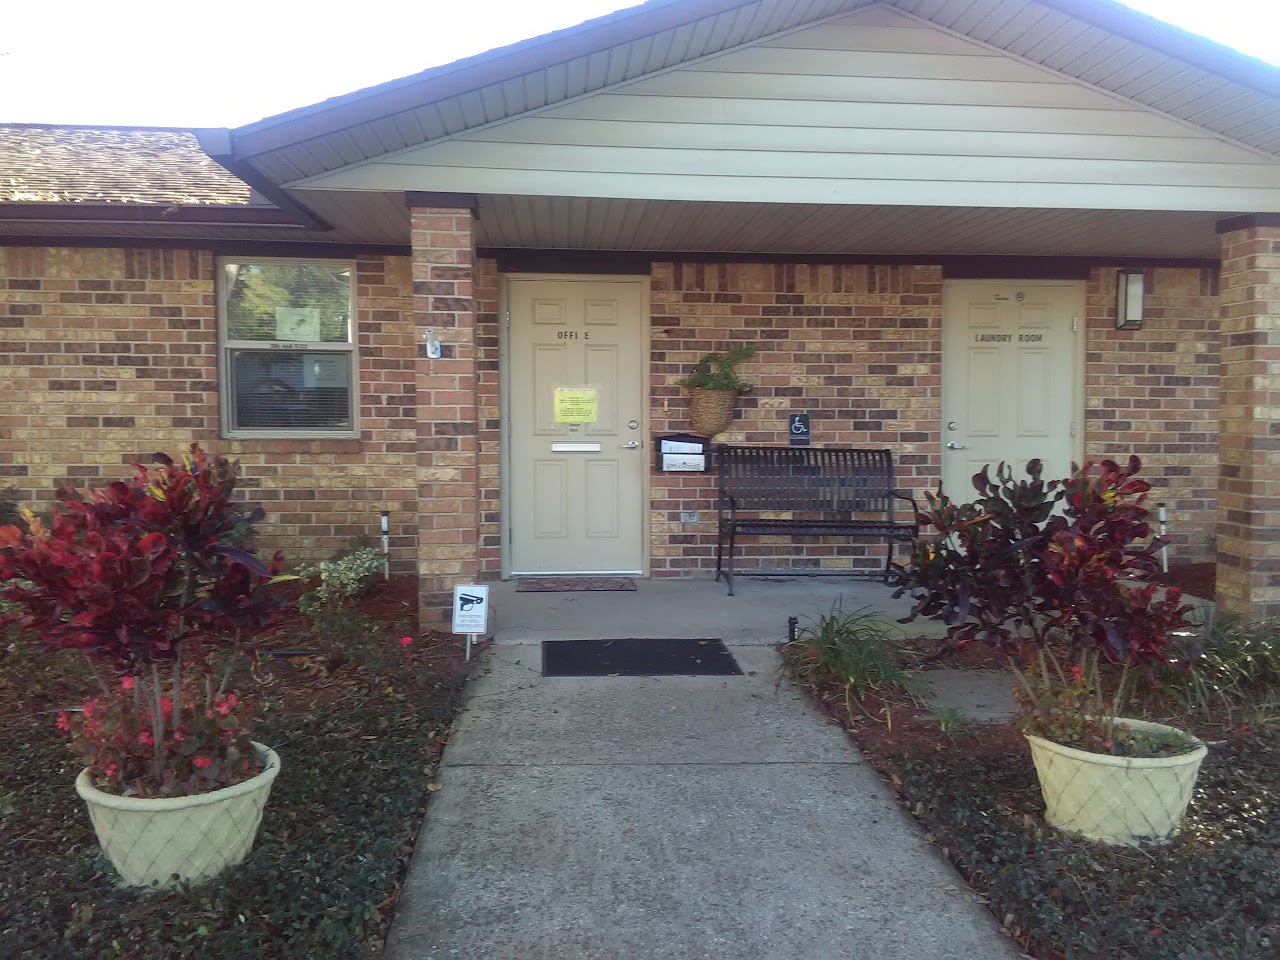 Photo of RIDGECREST MANOR. Affordable housing located at 37 RIDGEVIEW DRIVE DEBARY, FL 32713